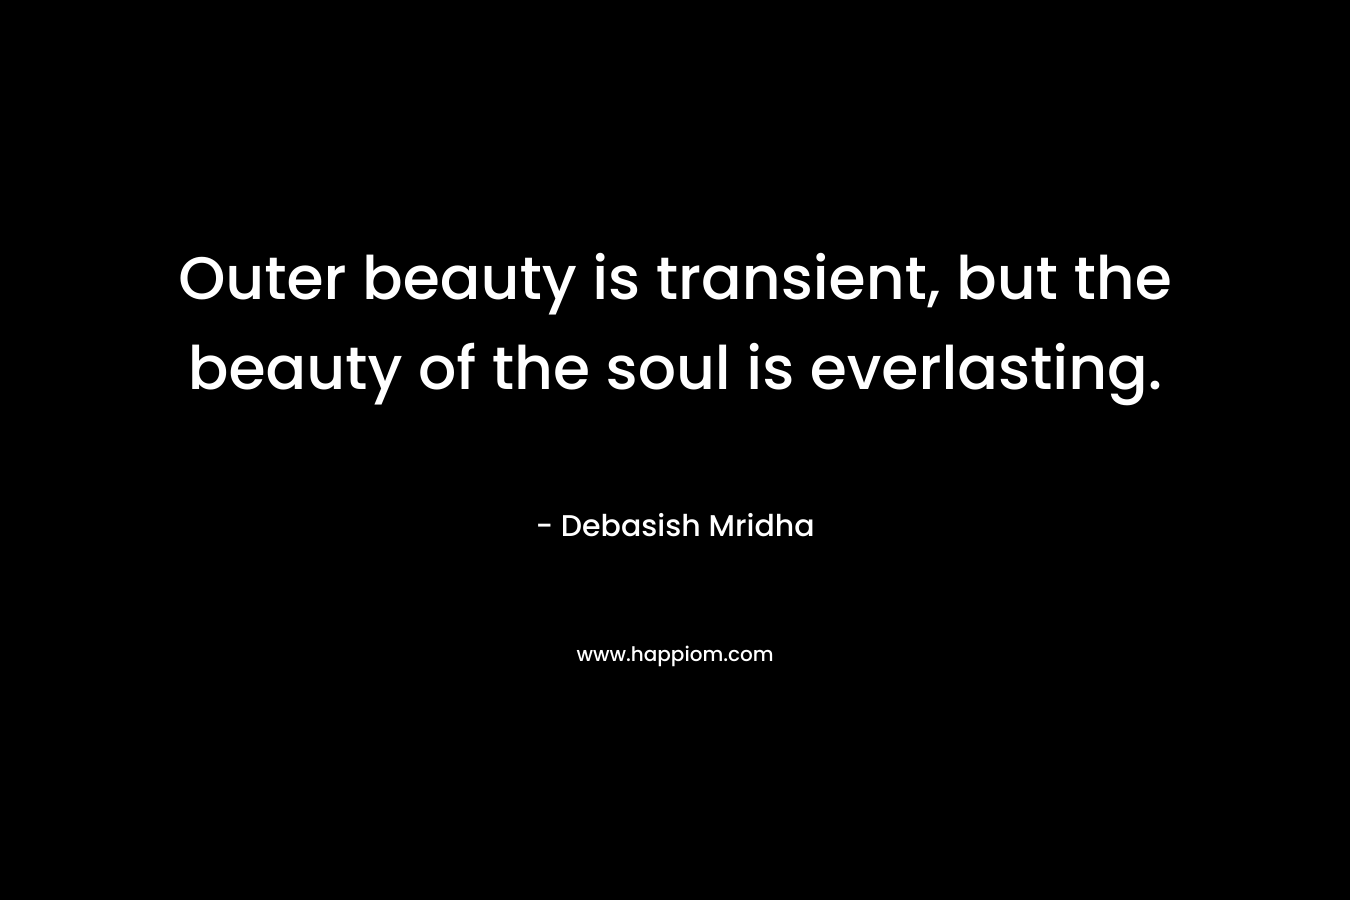 Outer beauty is transient, but the beauty of the soul is everlasting. – Debasish Mridha